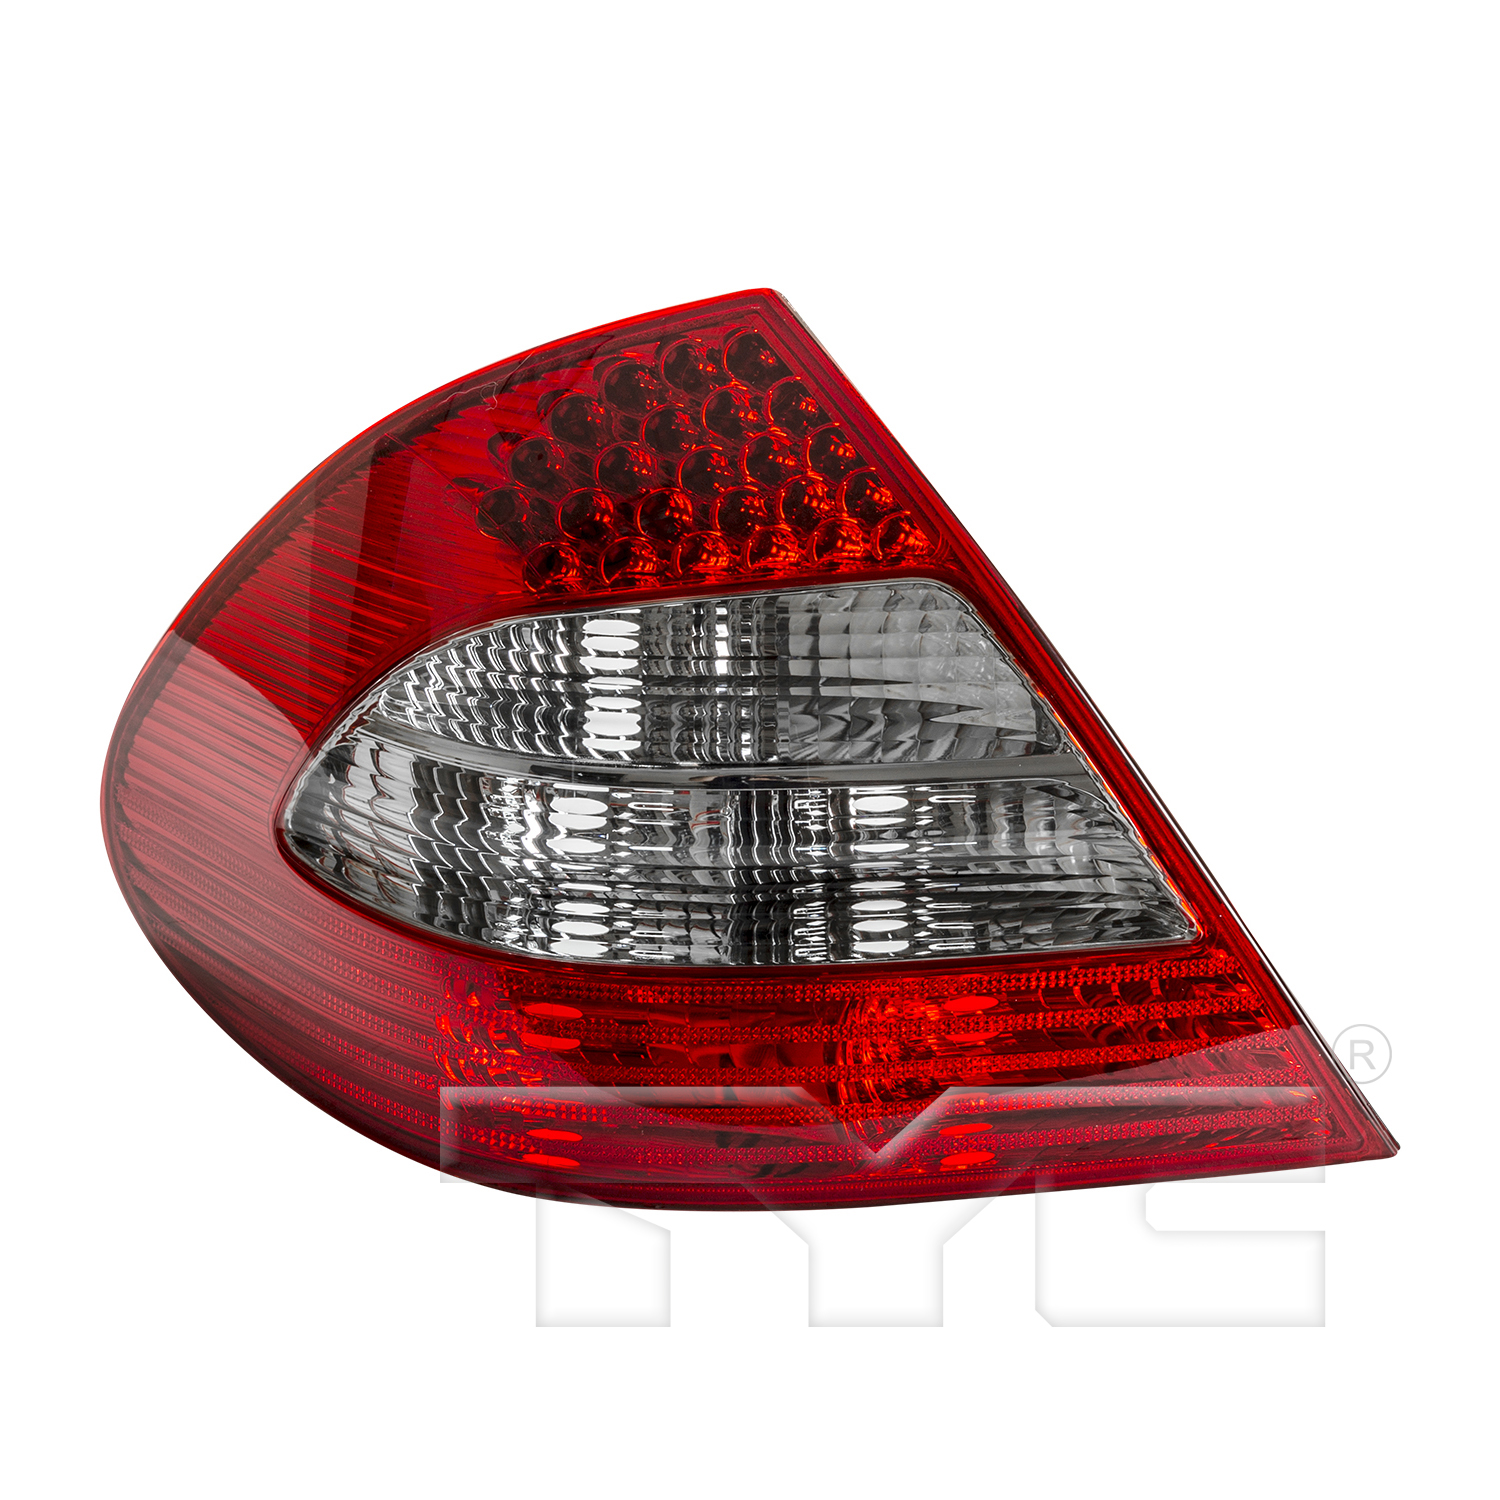 Aftermarket TAILLIGHTS for MERCEDES-BENZ - E320, E320,07-09,LT Taillamp assy